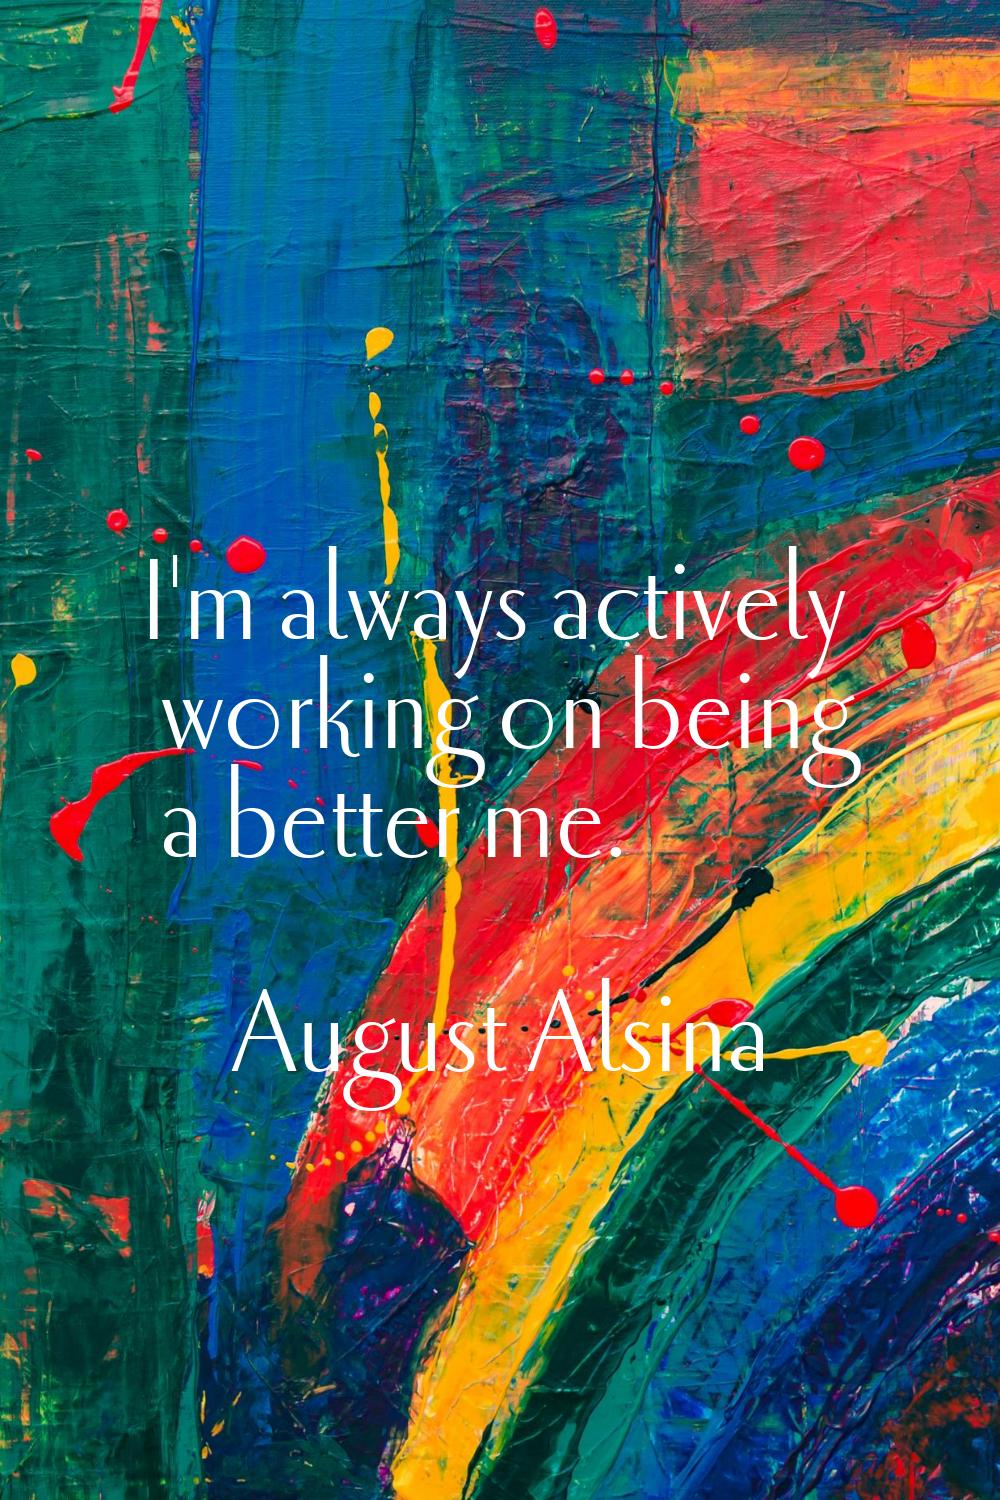 I'm always actively working on being a better me.